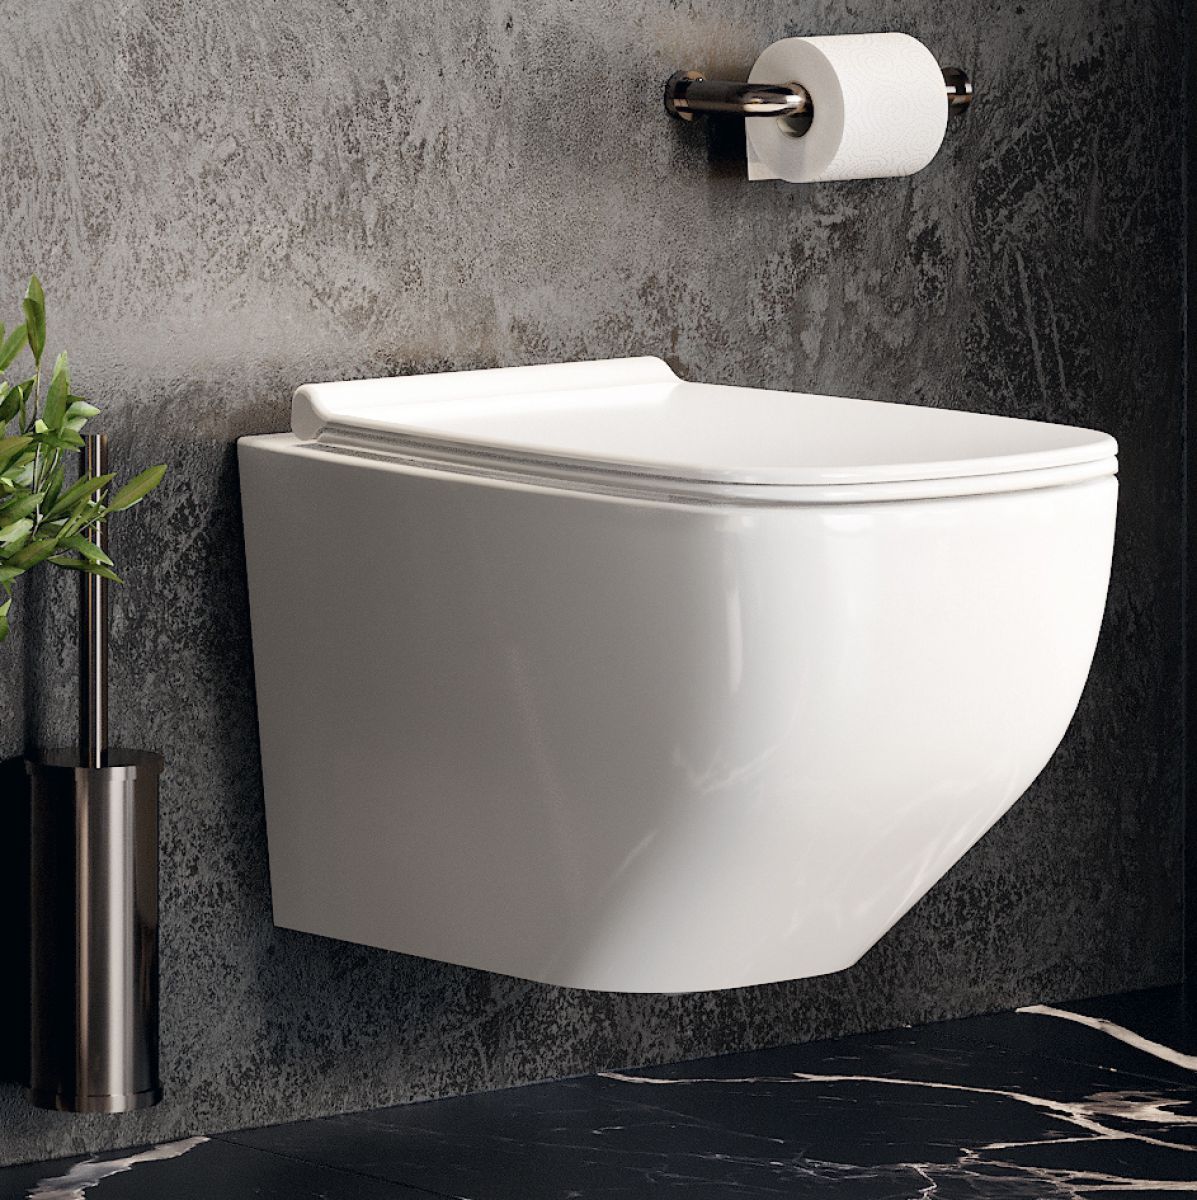 image example of a wall hung toilet